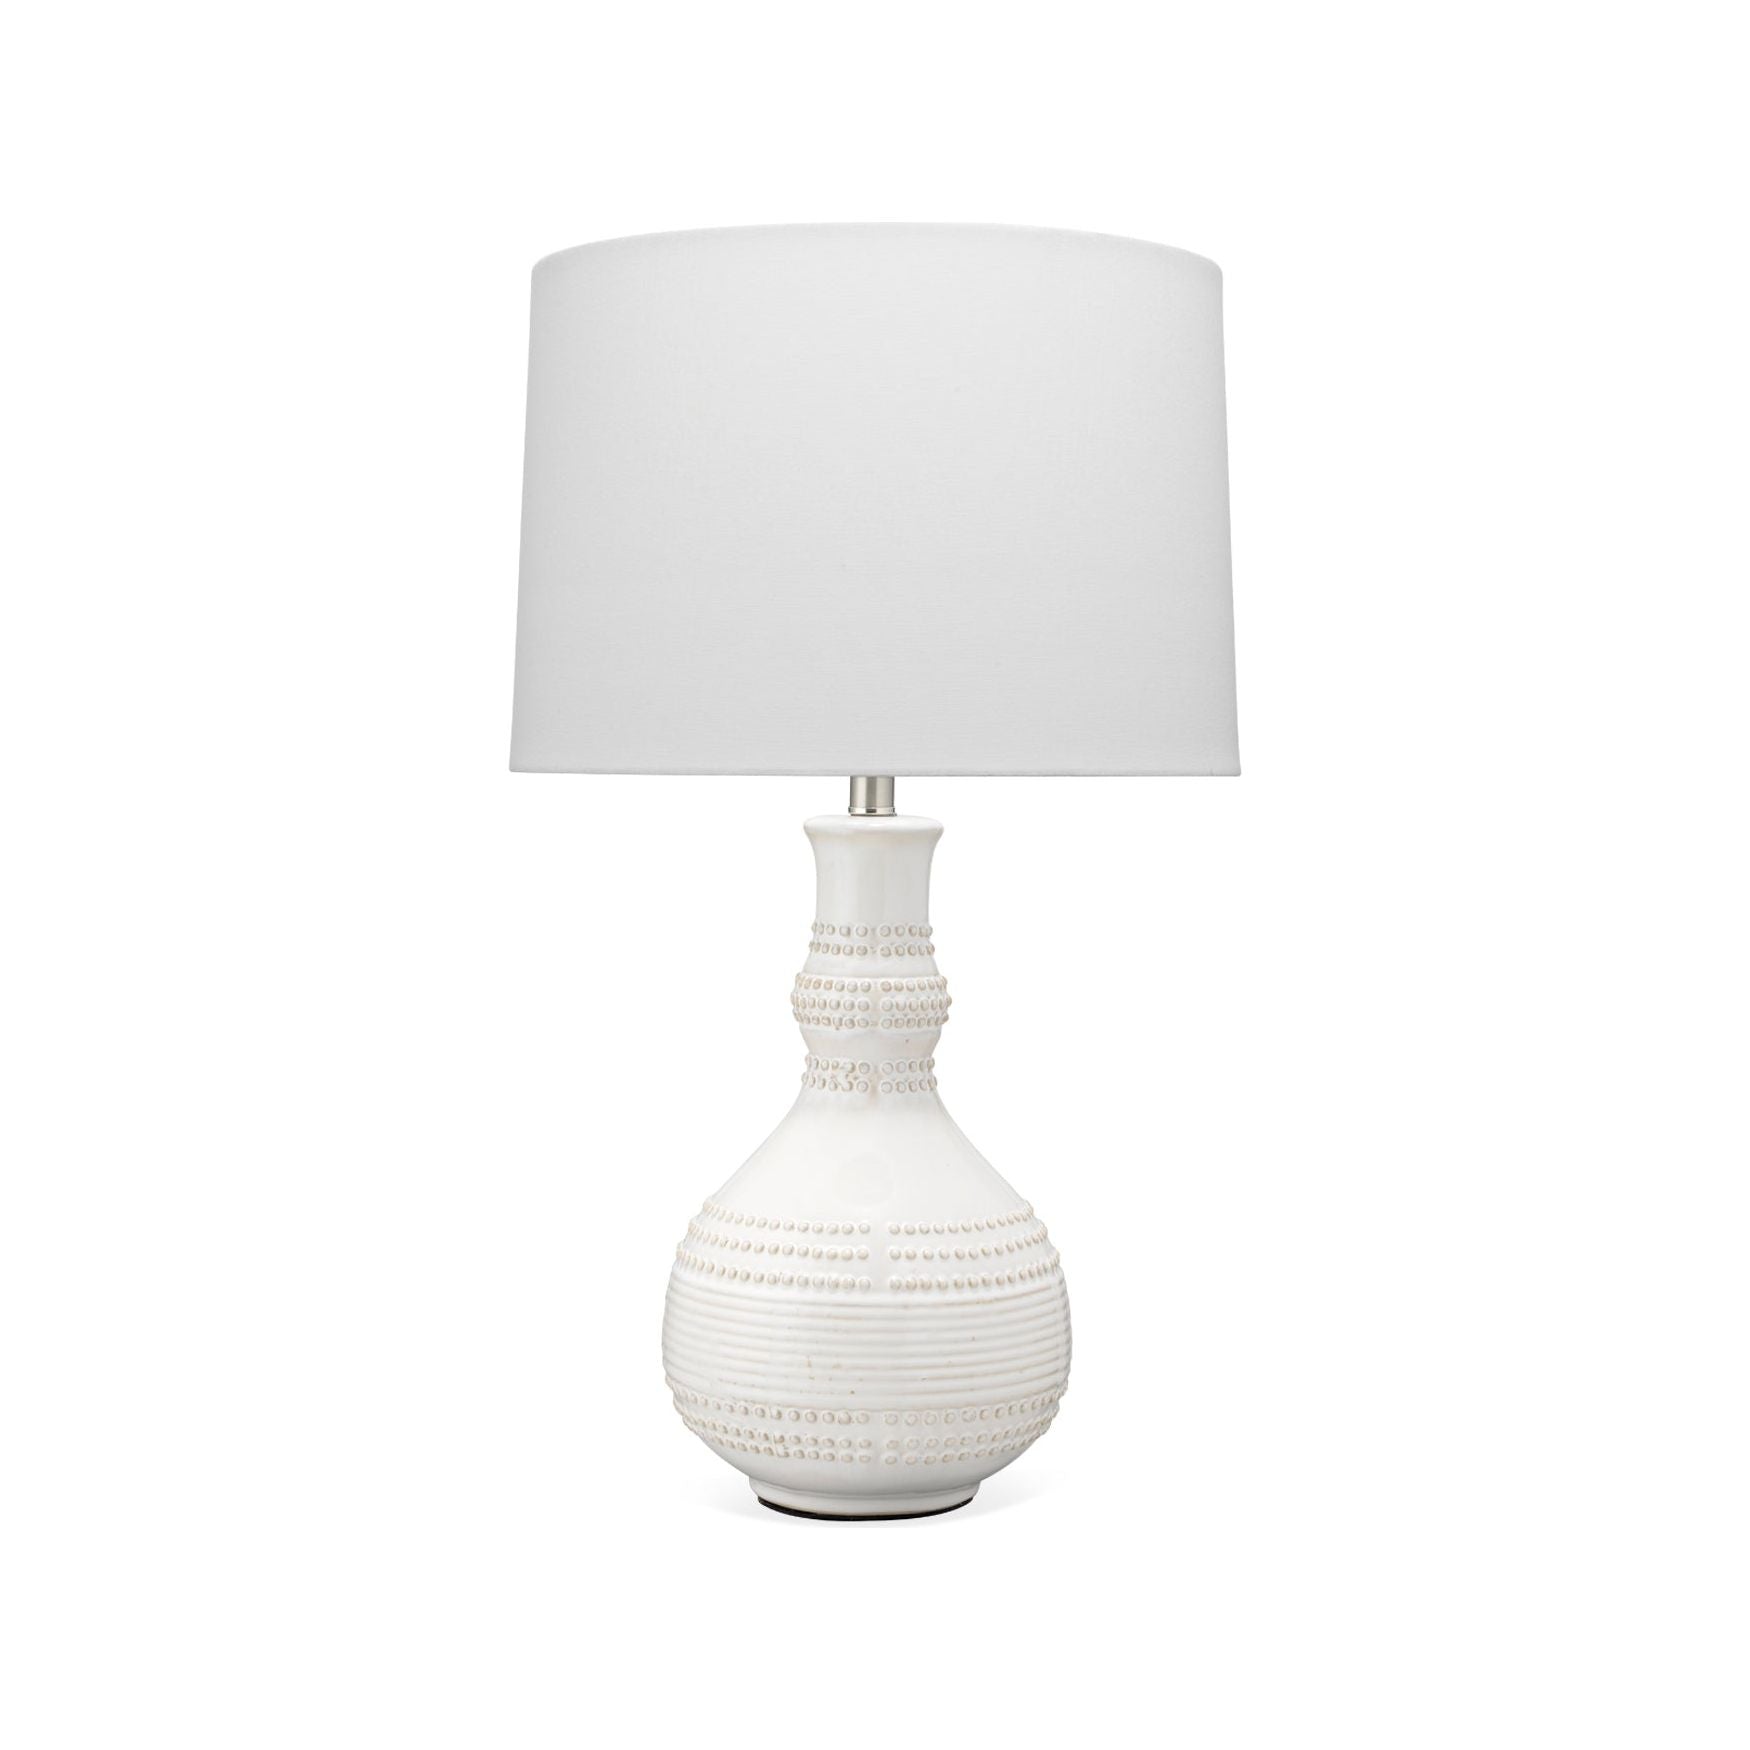 Jamie Young Company - LS9DROPLETWH - Droplet - Droplet Table Lamp - White